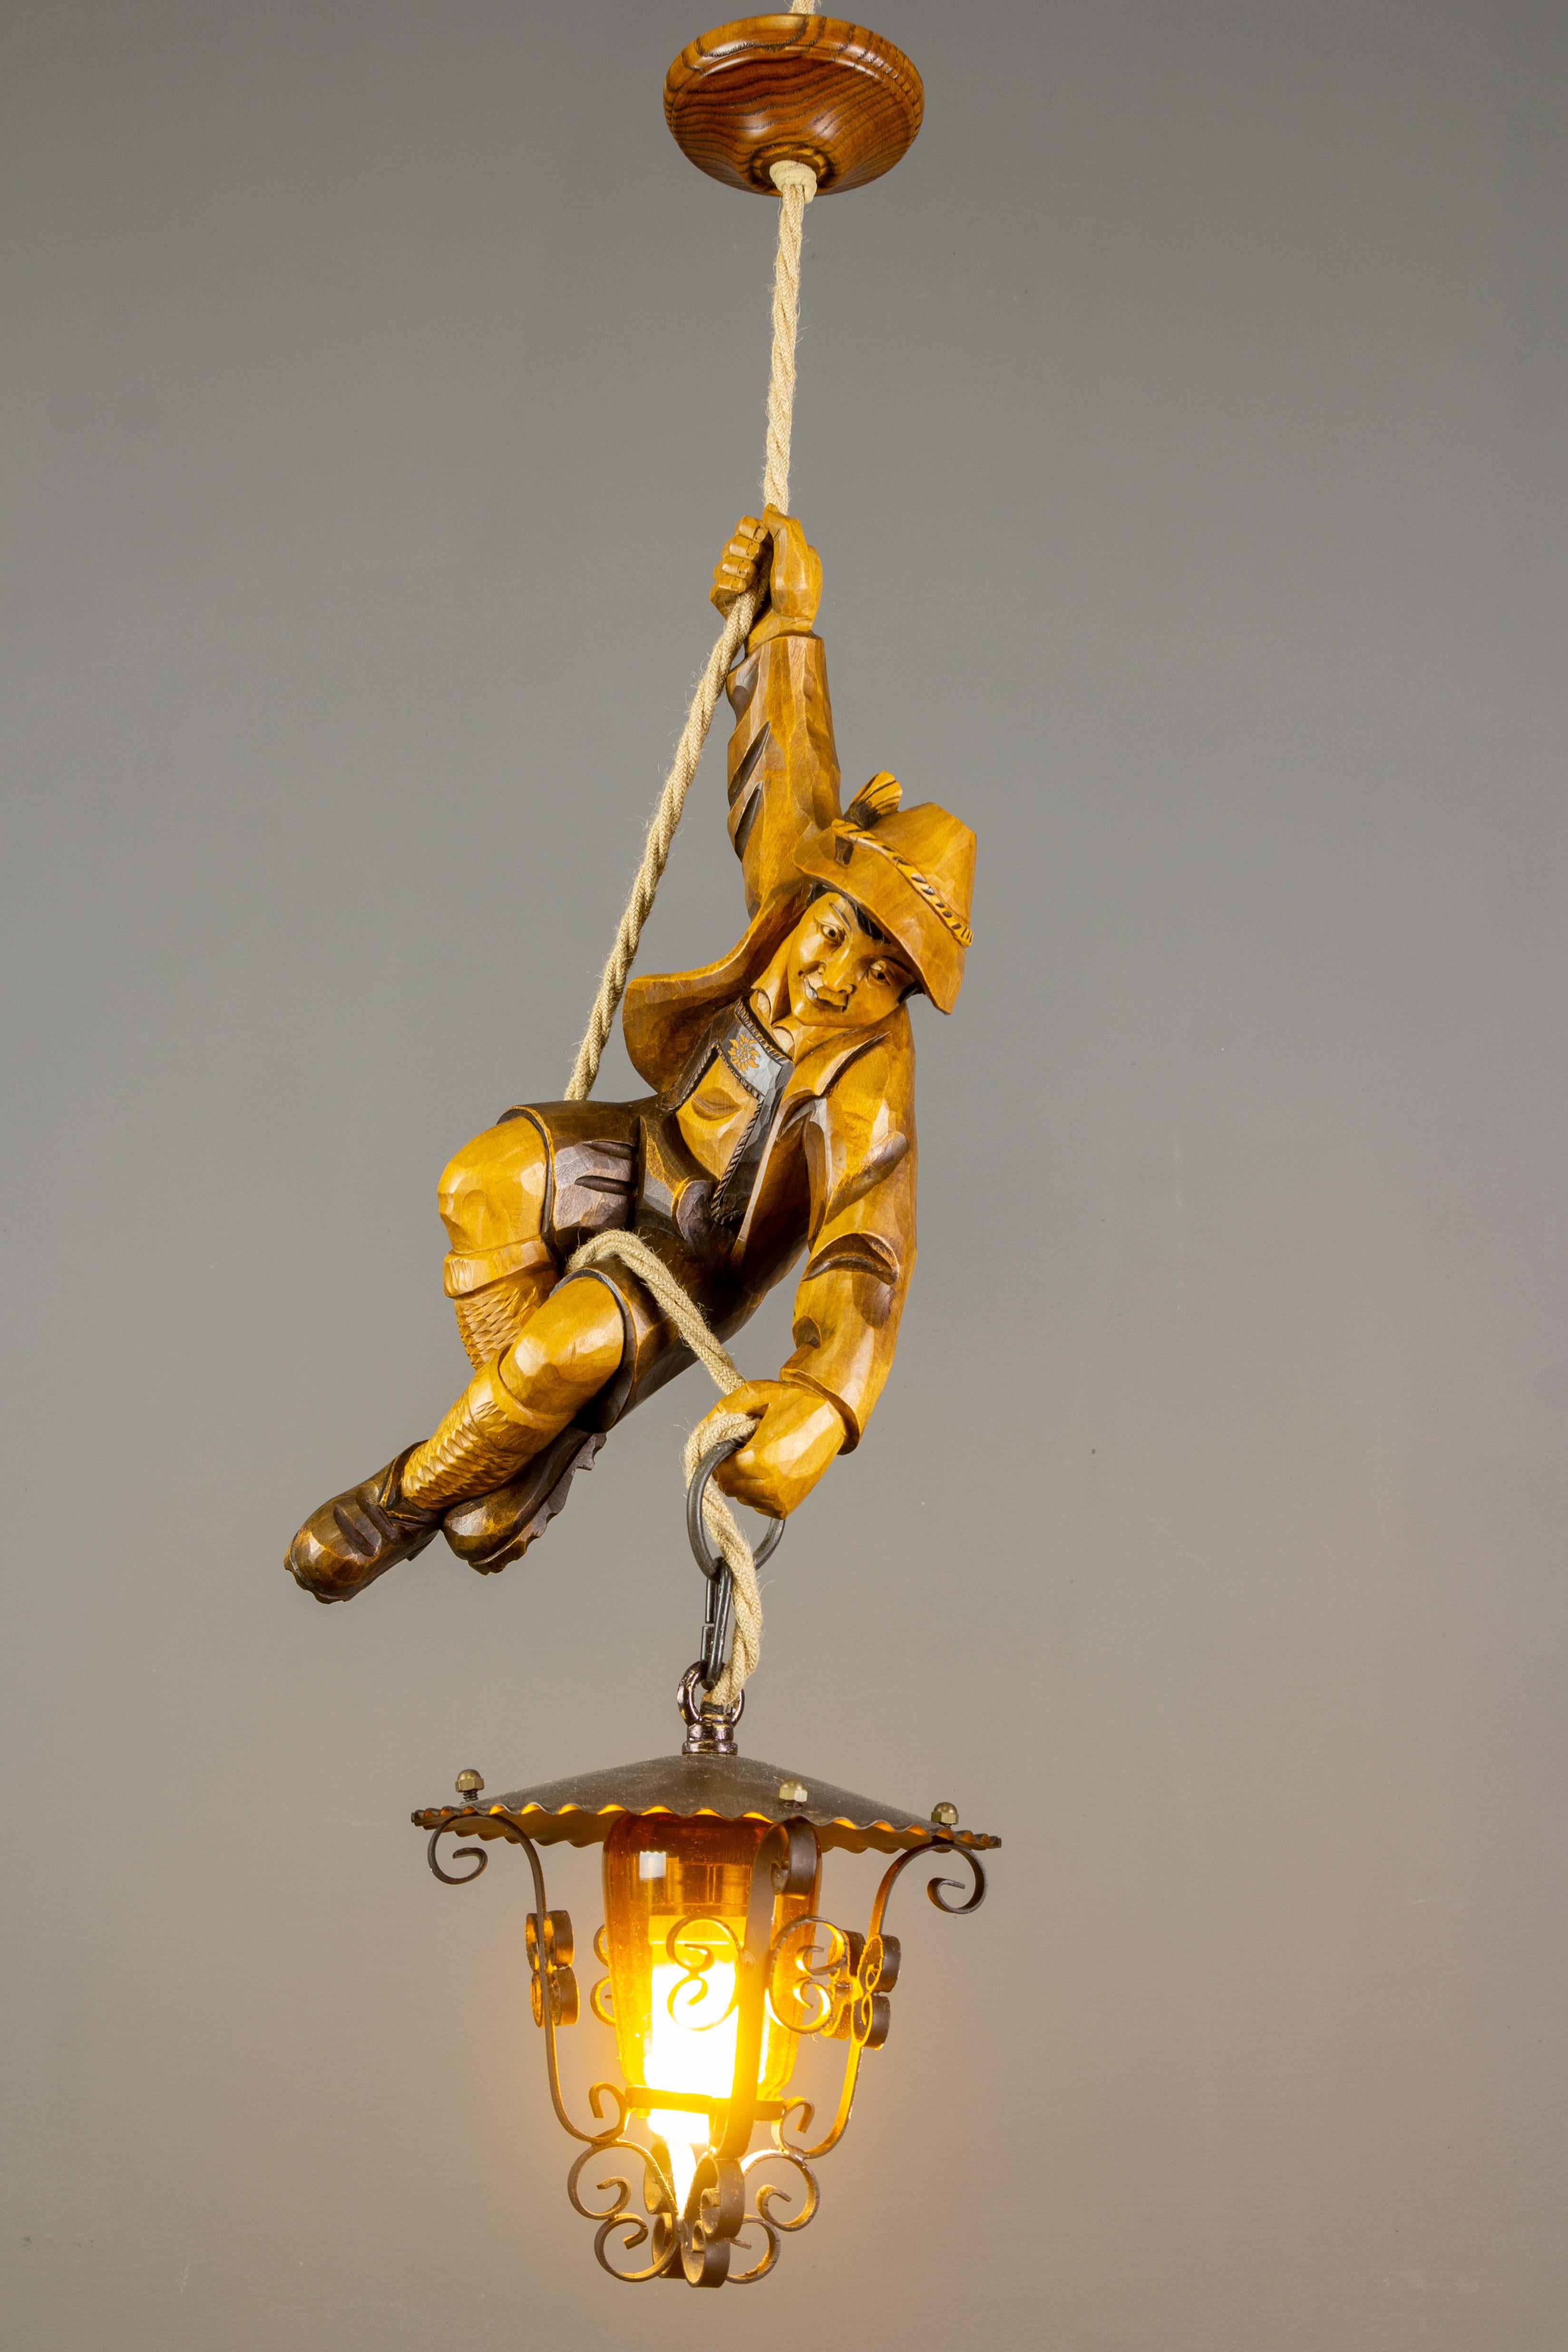 Hand-Carved German Pendant Light Hand Carved Wood Figure Mountain Climber with Lantern